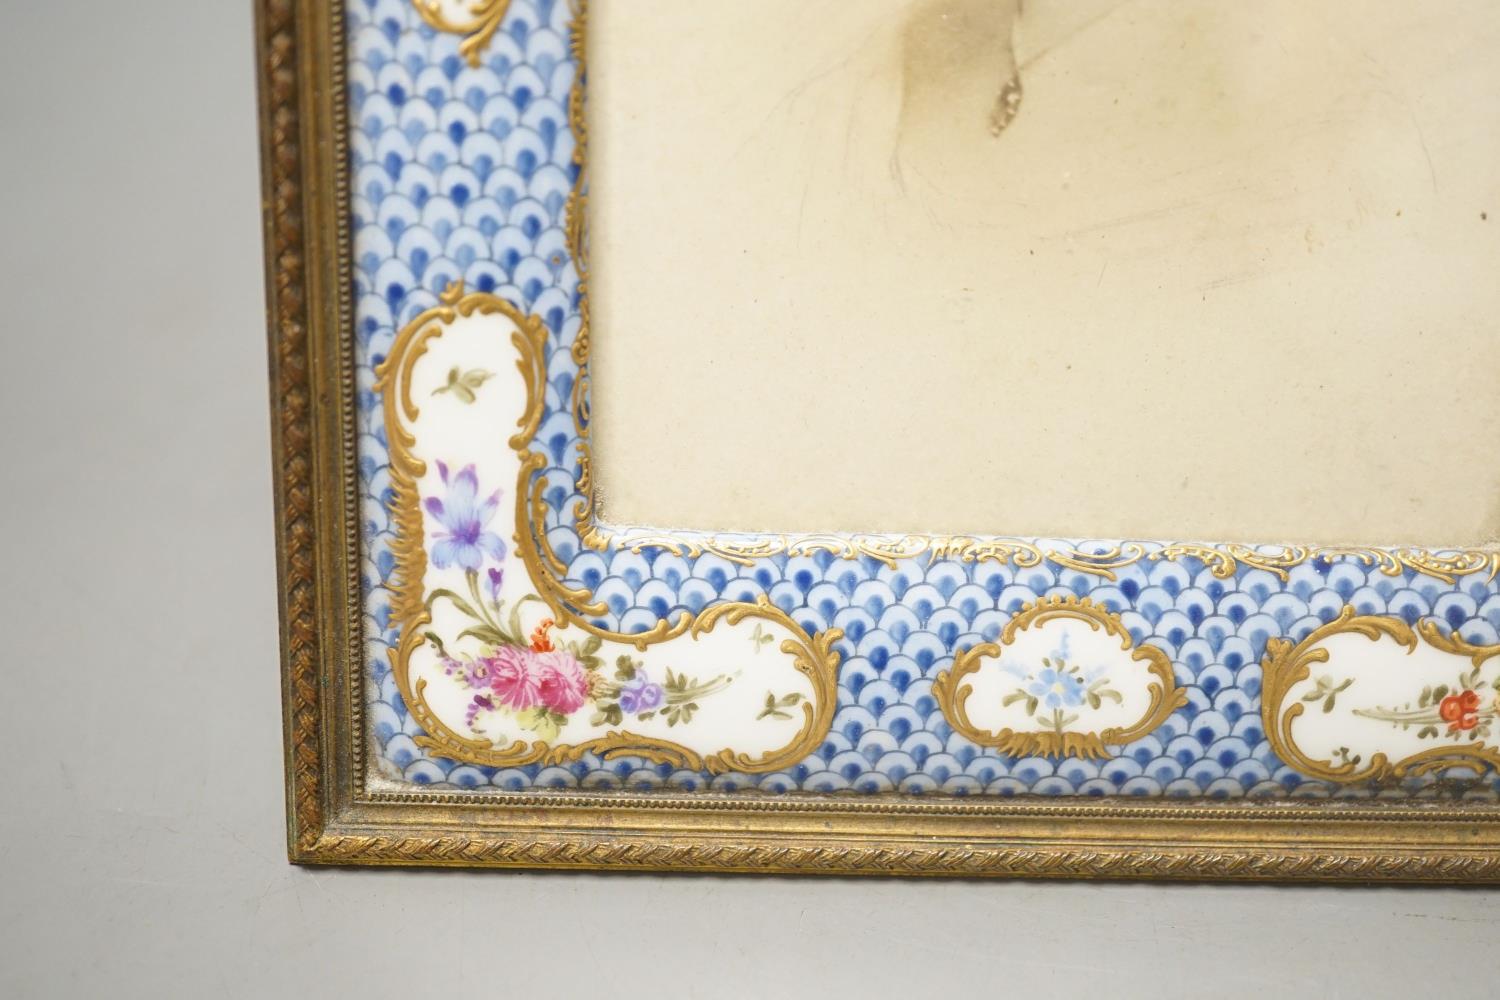 A late 19th century Dresden porcelain and ormolu mounted easel frame, height 23cm - Image 4 of 4